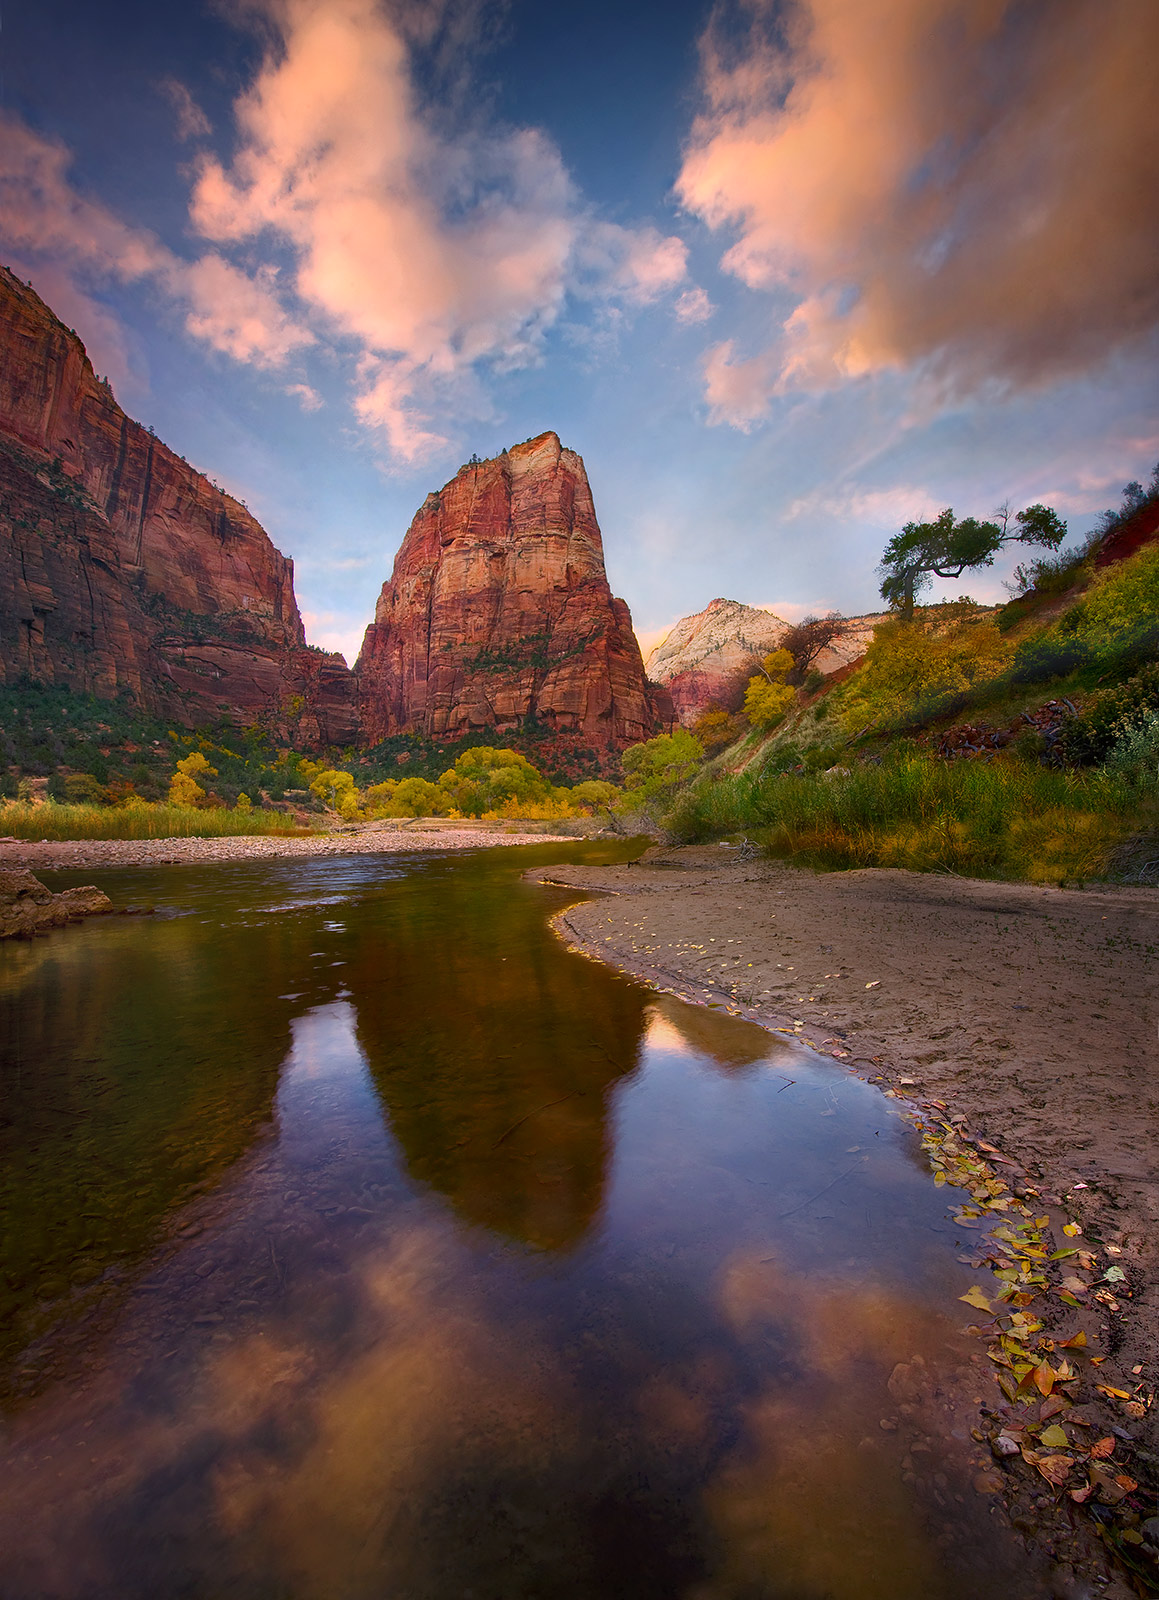 A rare view of the red rock towers of Zion Park in Utah reflected at sunset amidst Autumn colors.